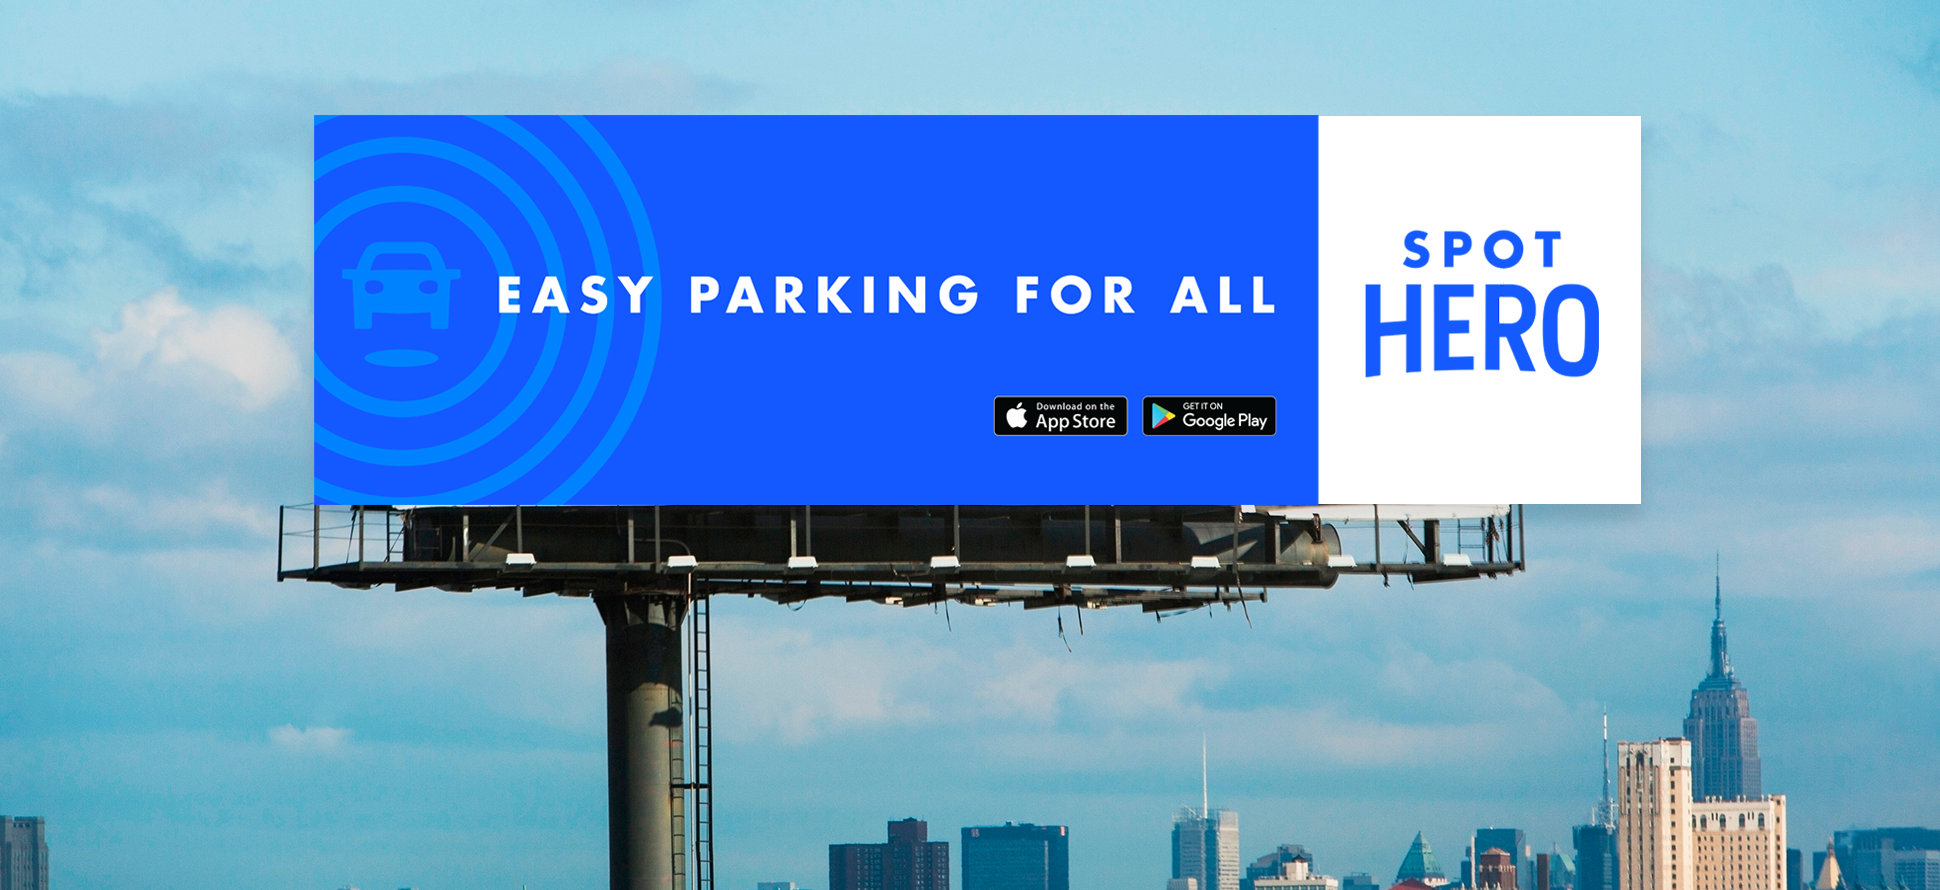 Win Free Parking This Summer From Apple Pay and SpotHero